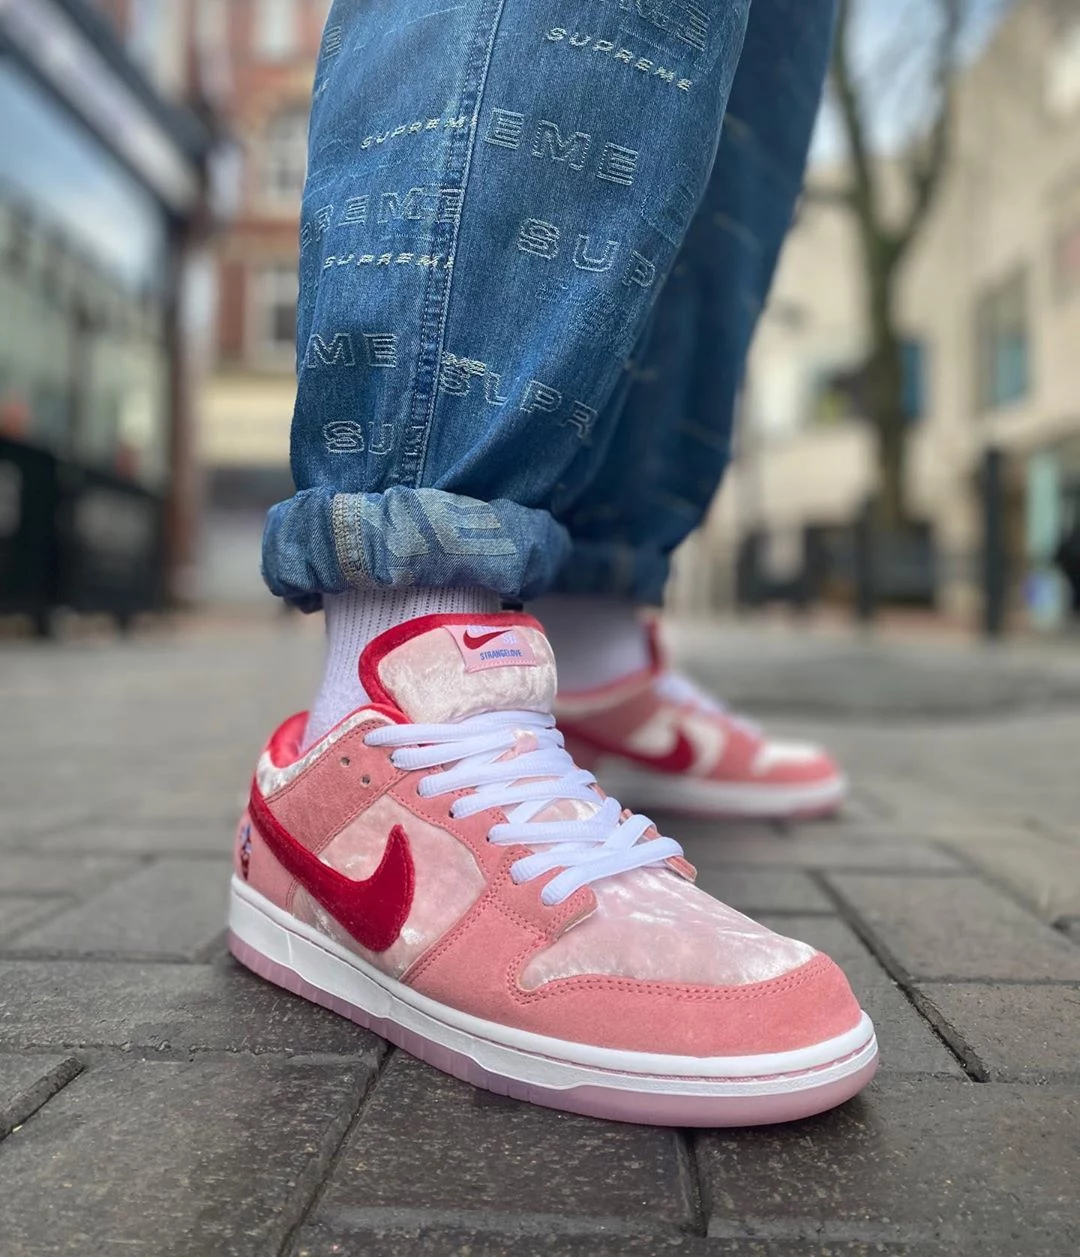 women model nike dunks suede sneakers in red and pink with velvet